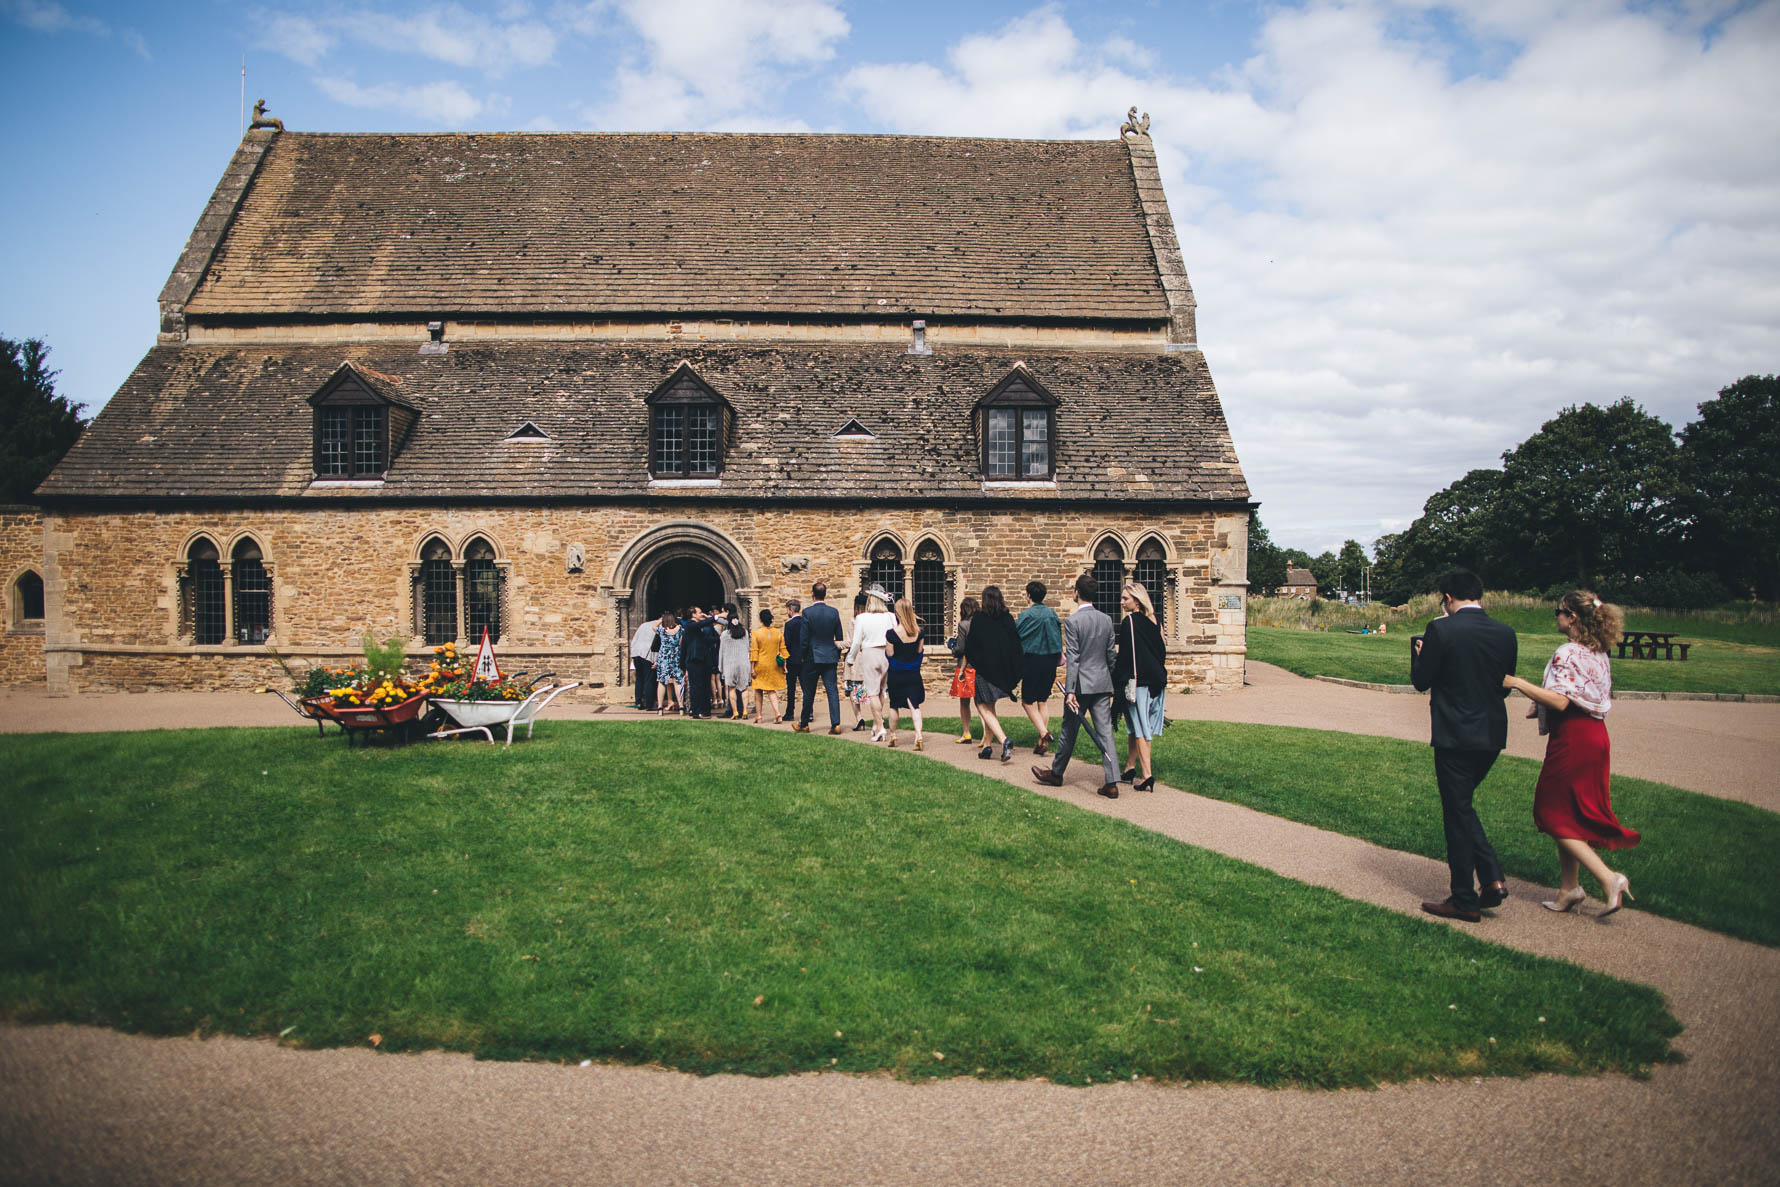 View of Oakham Castle Great Hall from outside with a lawned area to the front and right side and wedding guests walking up the path towards the entrance